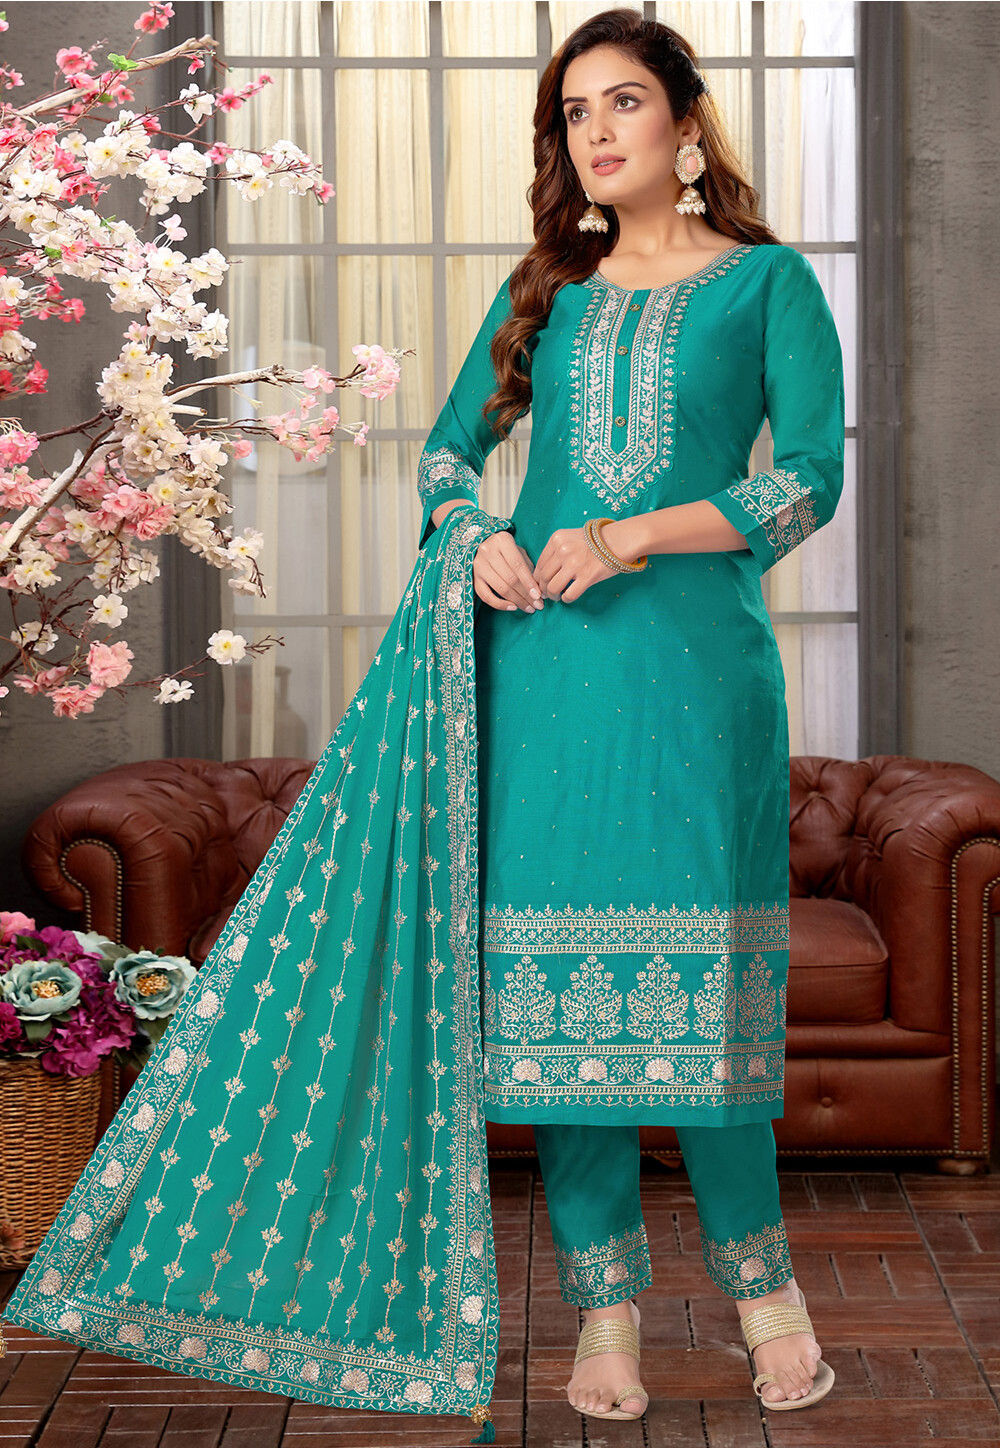 Buy Embroidered Chanderi Silk Pakistani Suit in Teal Green Online ...